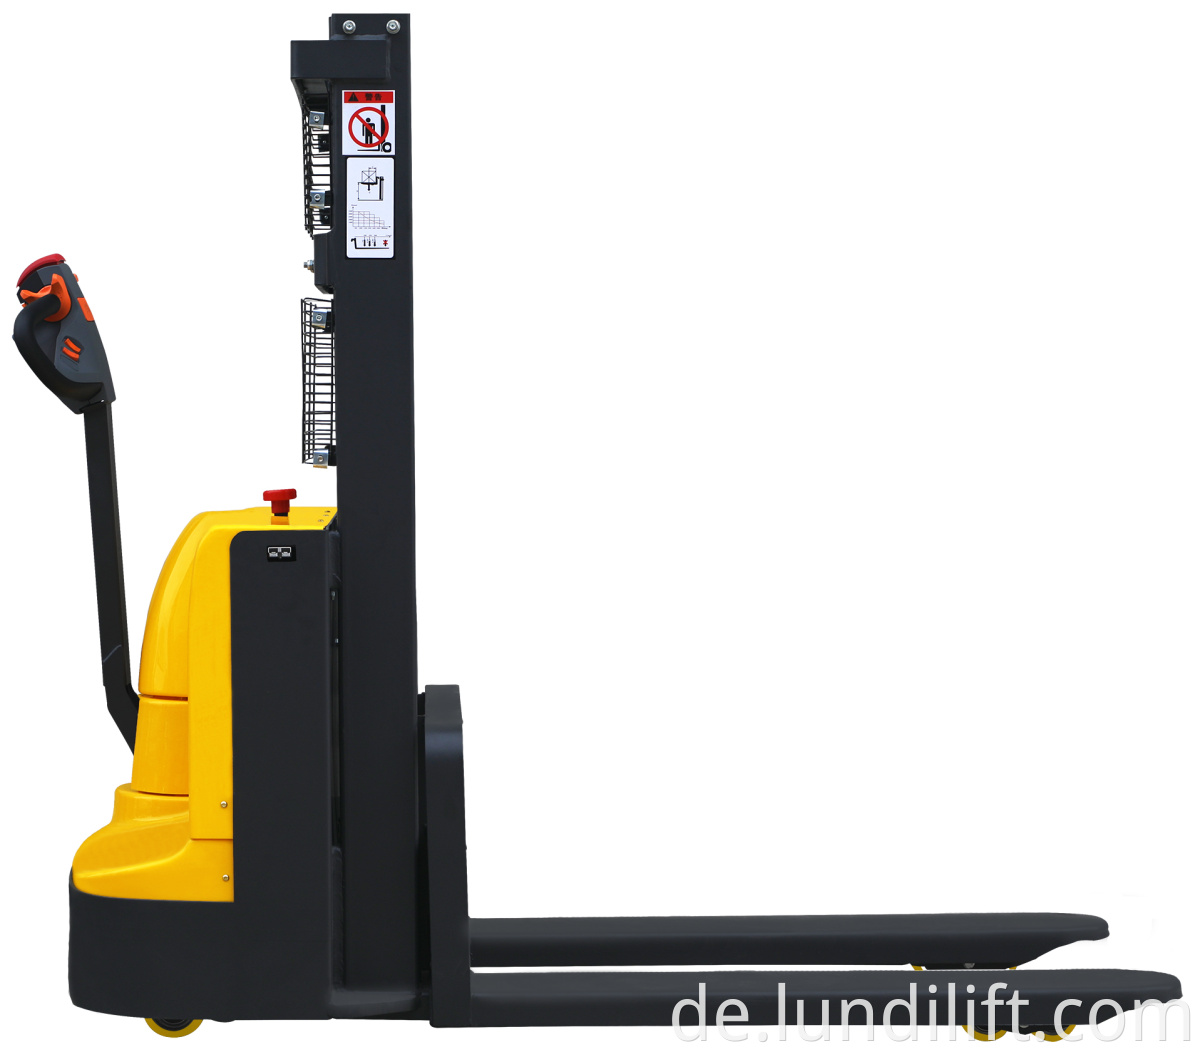 1.5T/2M electric fork lift warehouse forklift machine